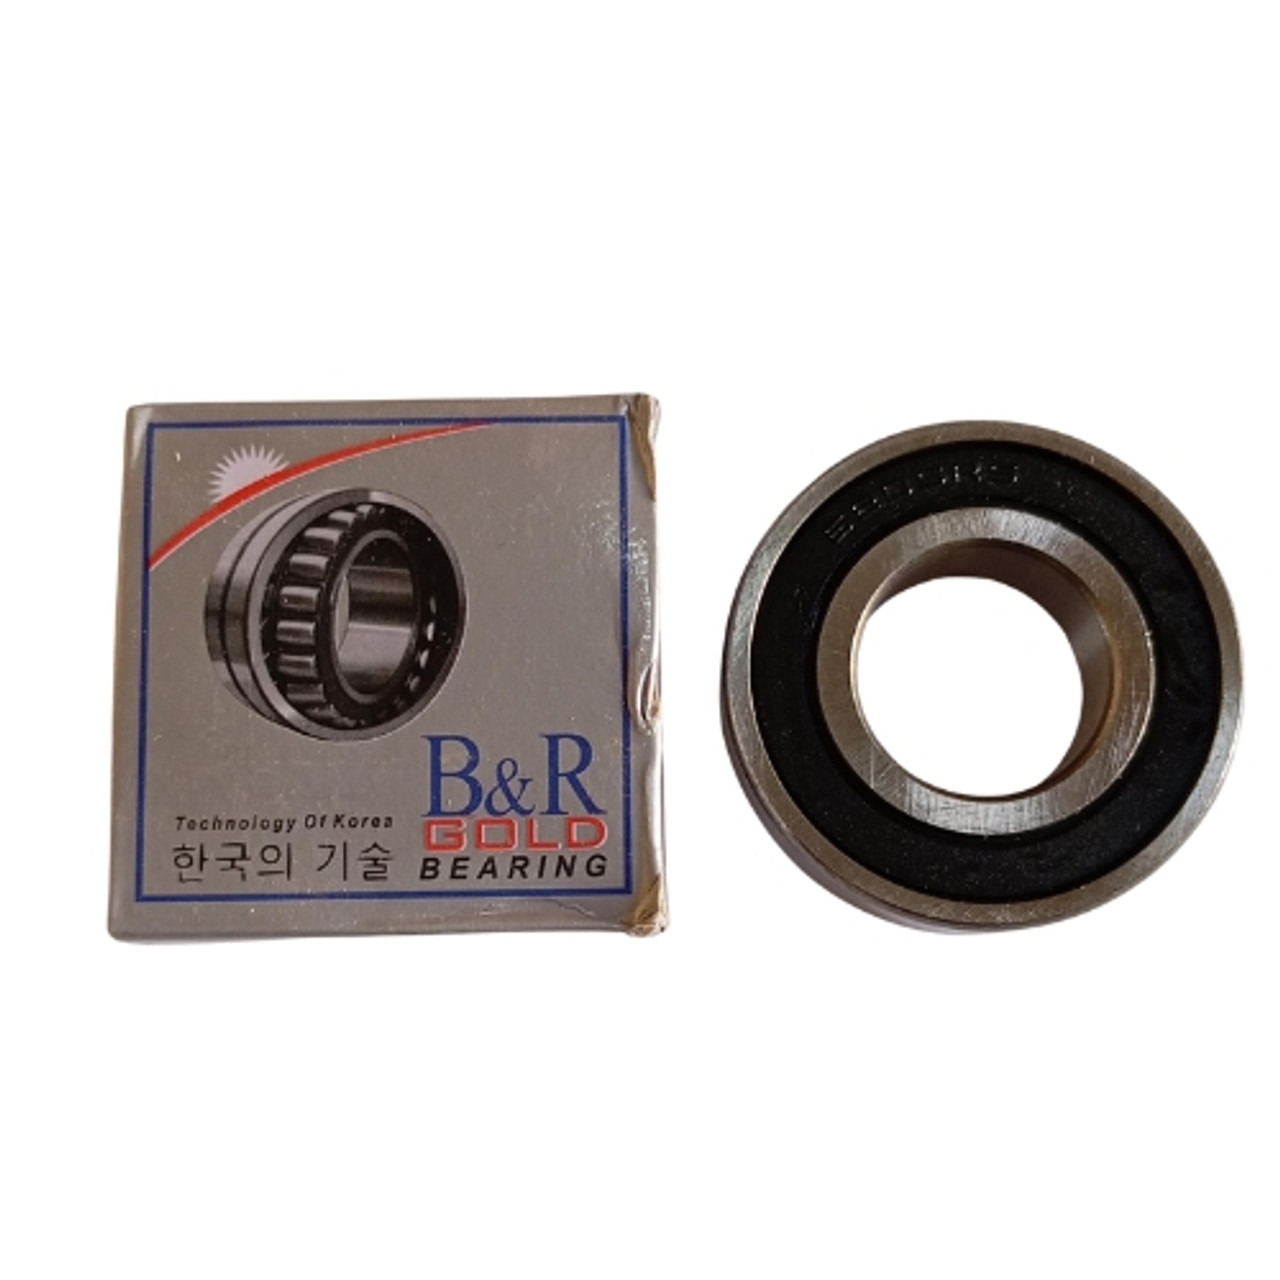 B&R Gold Deep Groove Ball Bearing 6205-2RS Generic,
Inside Diameter: 25mm 
Outside Diameter: 52mm 
Width: 15mm 
Seal Type: Rubber seal on both sides